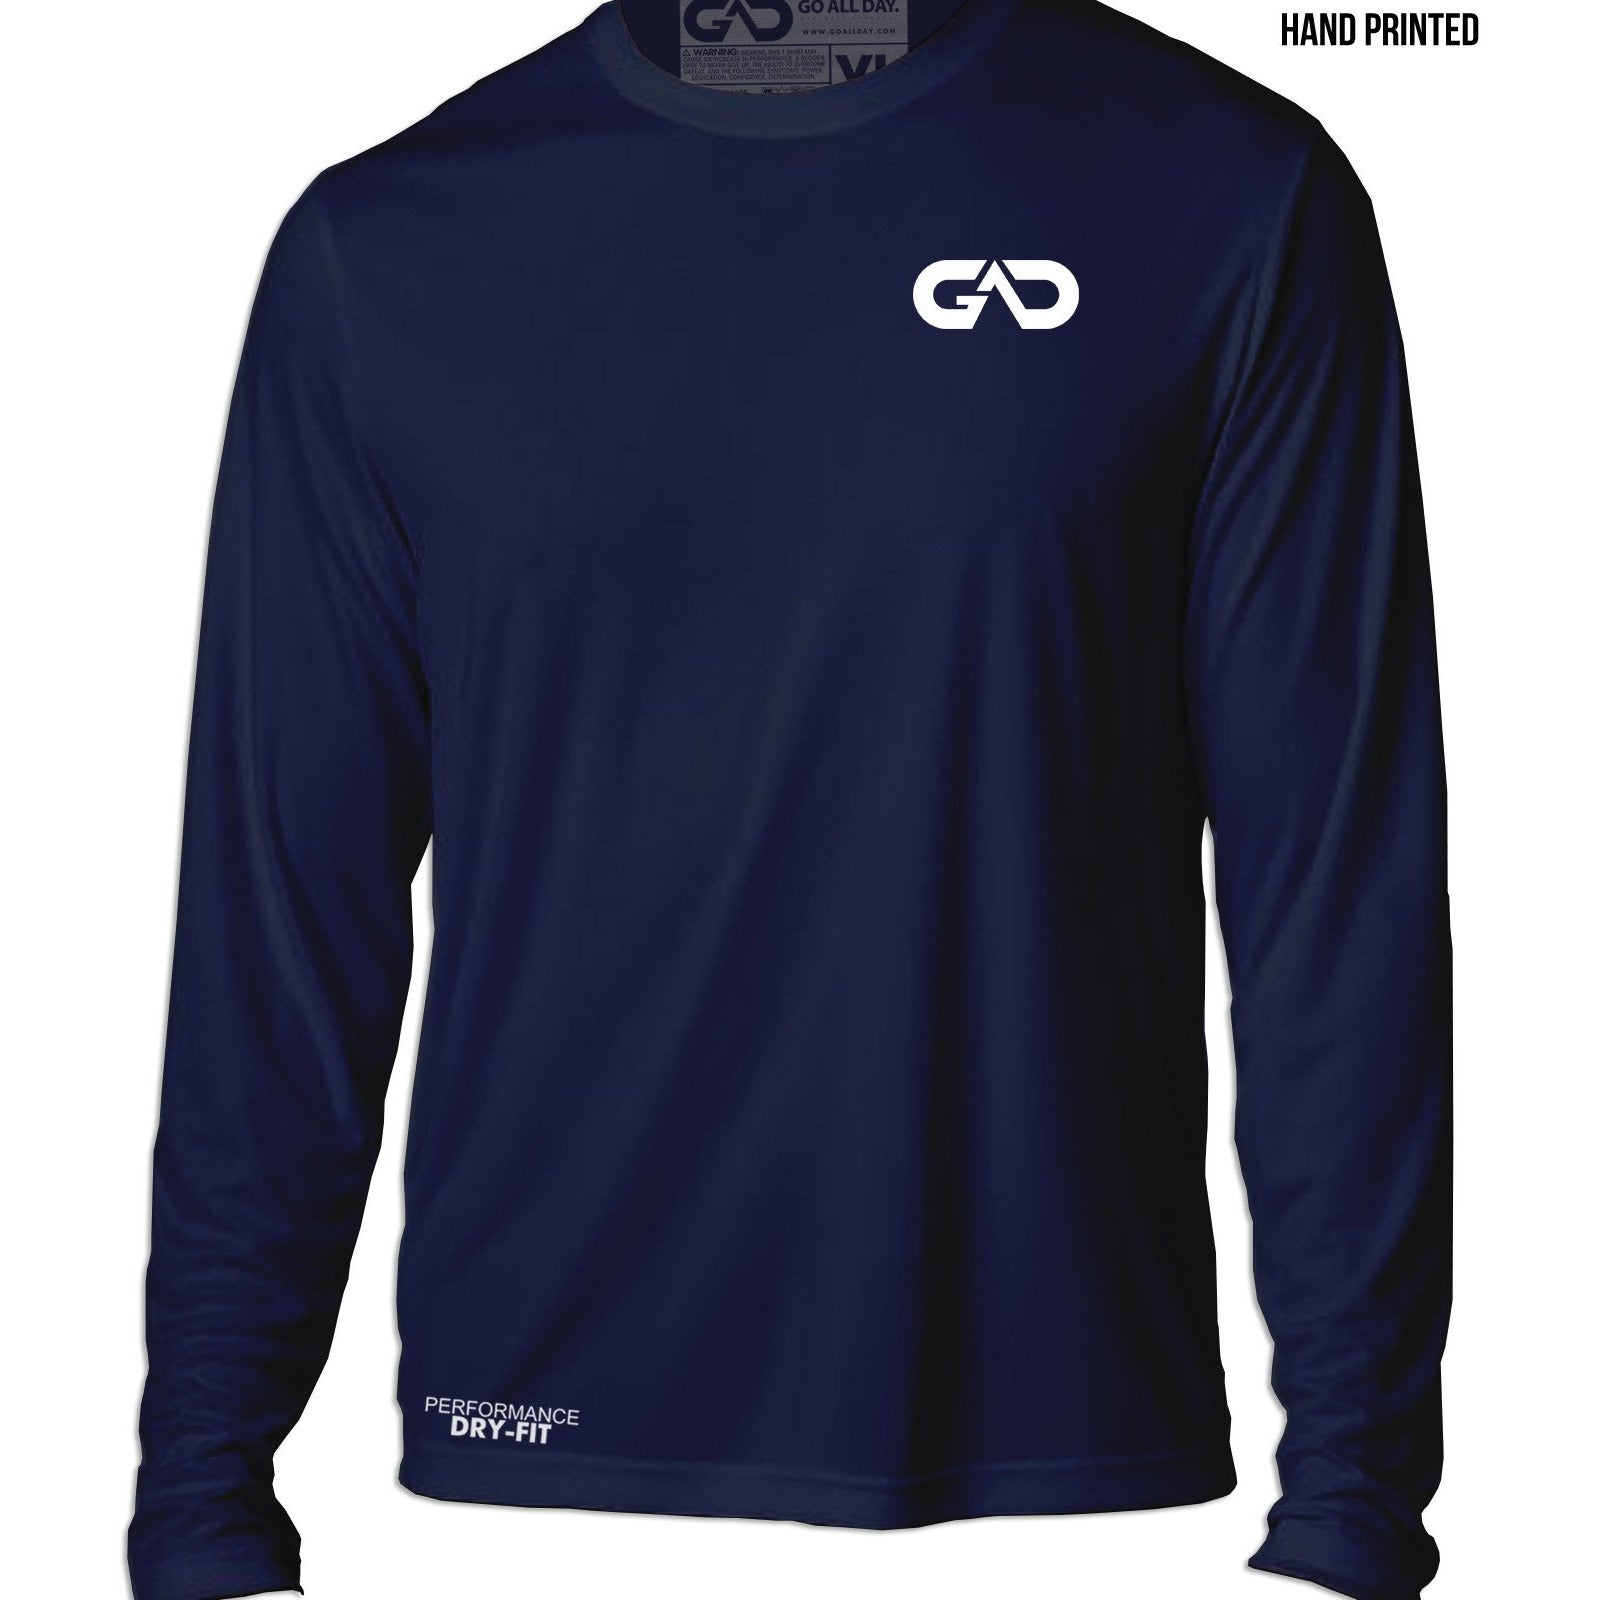 dry fit long sleeve